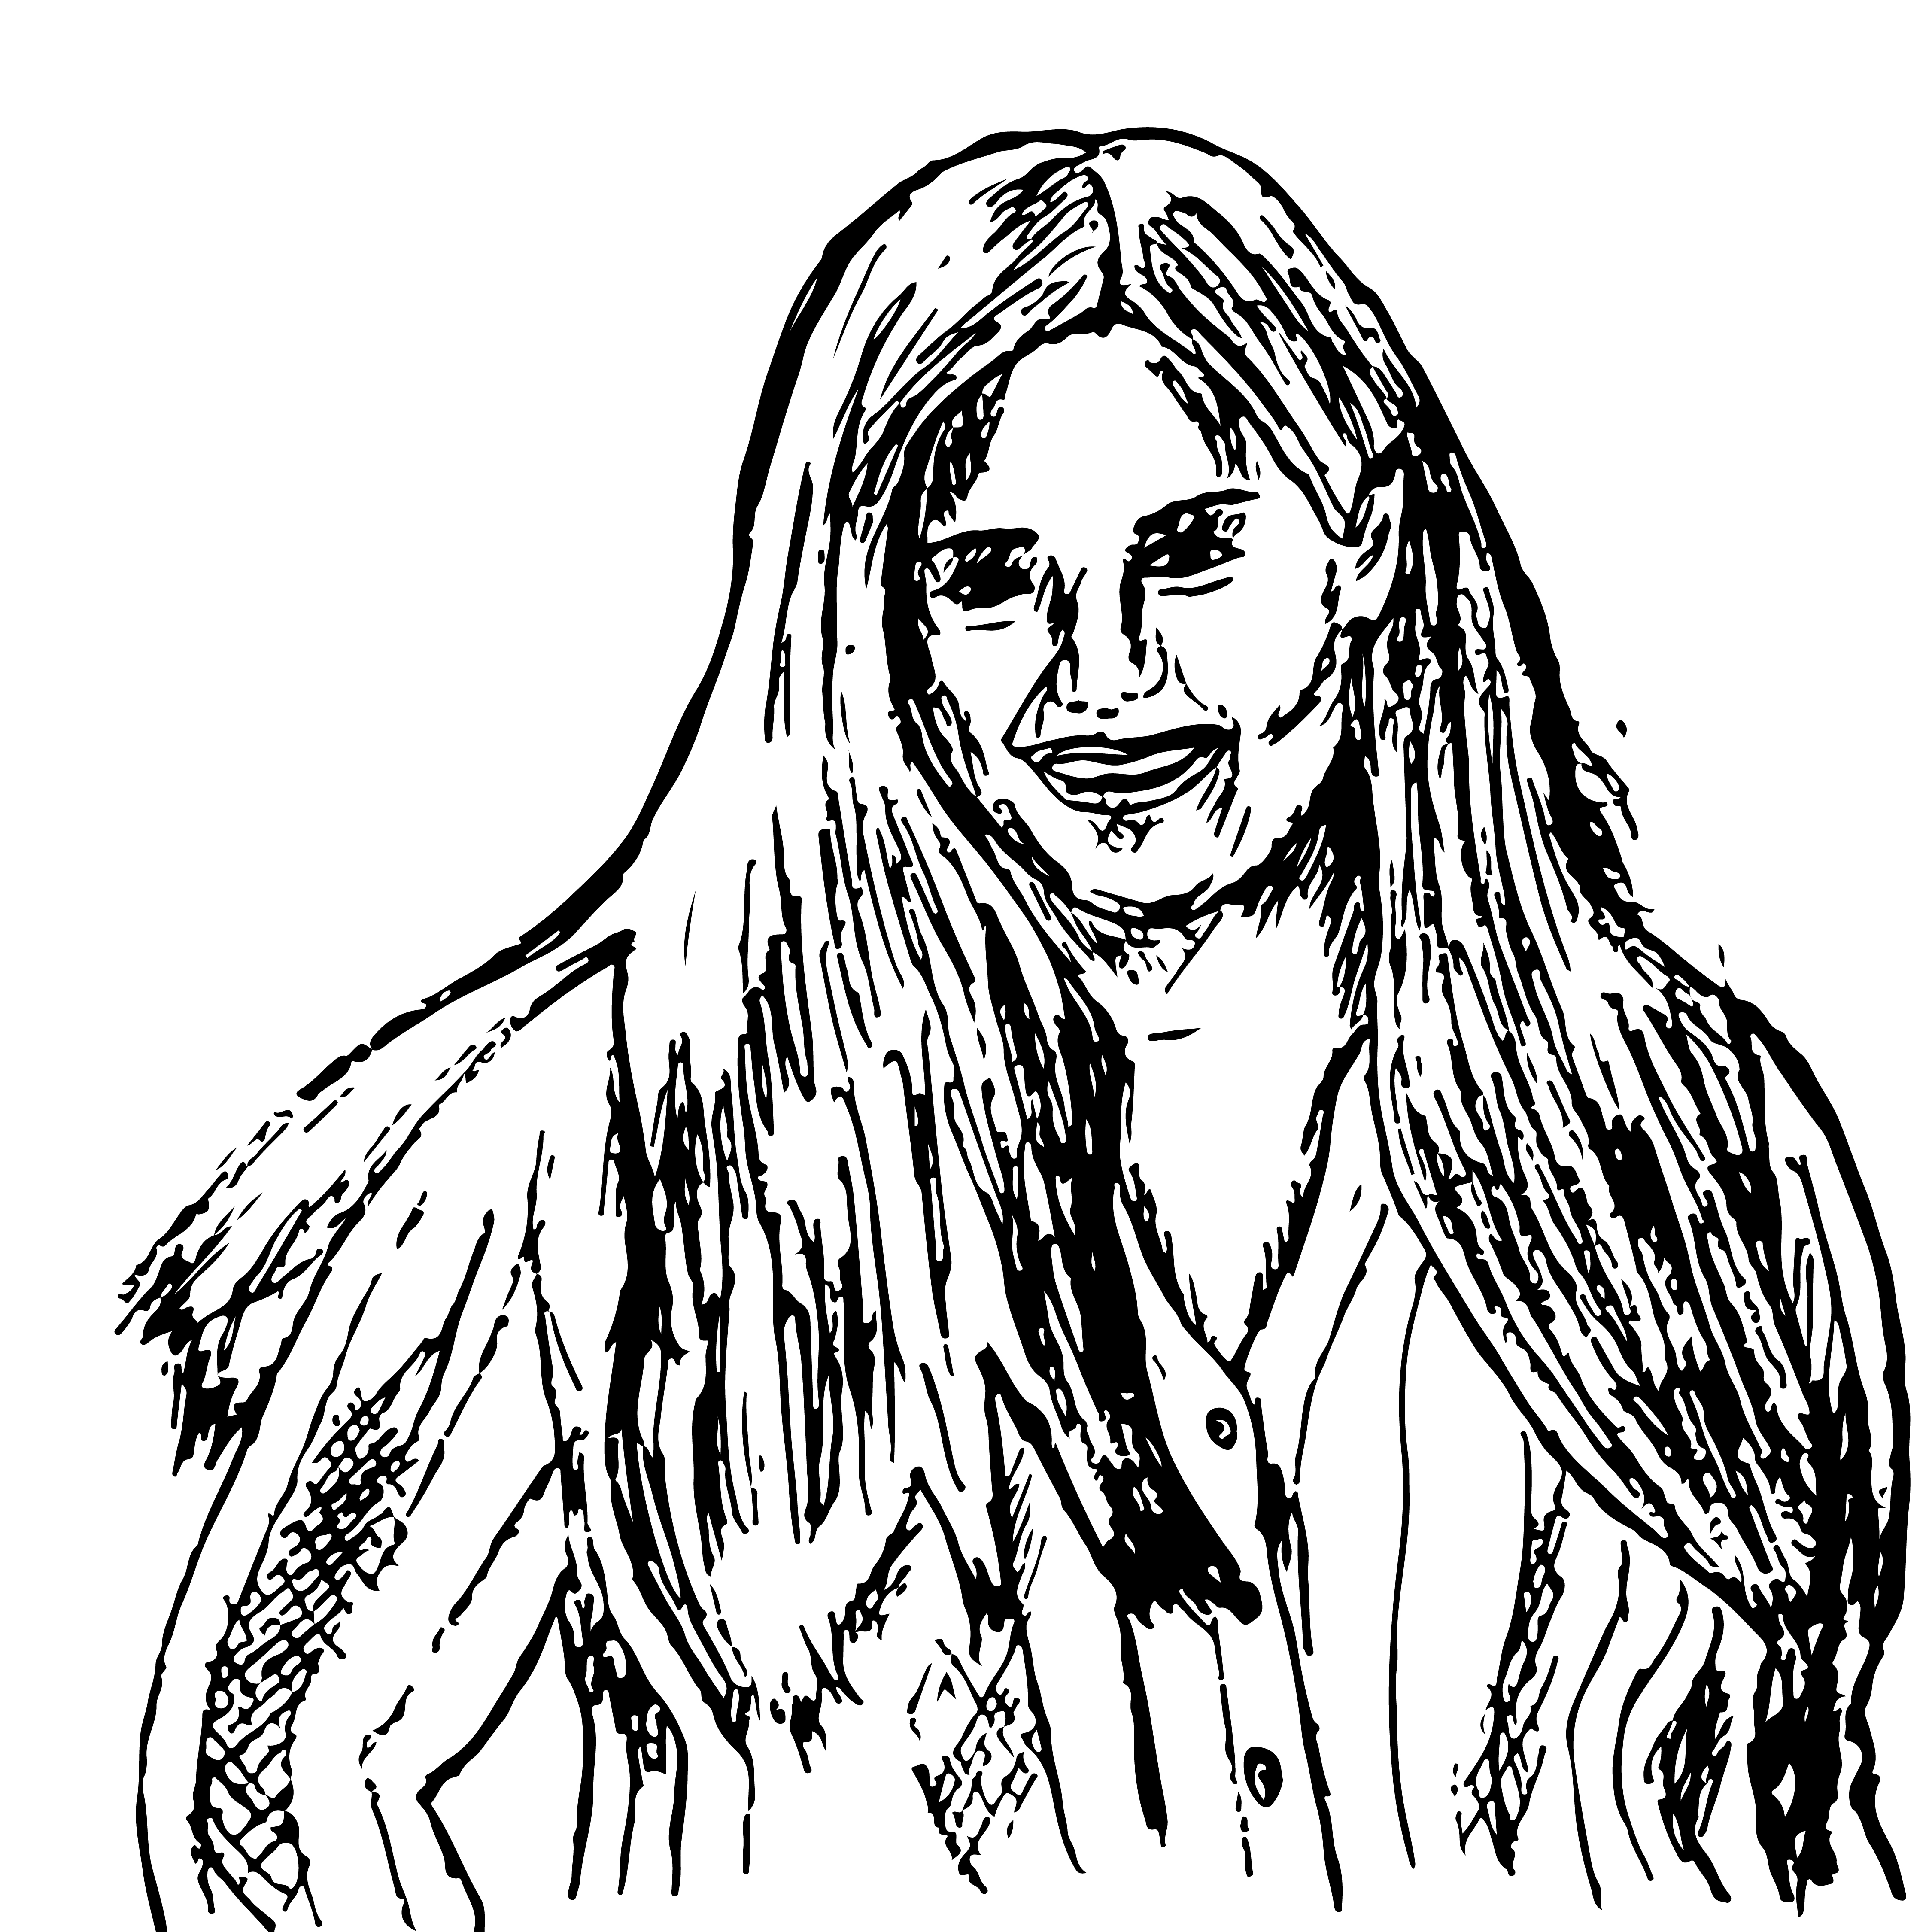 A drawing of a young Latina woman smiling at the camera, with her hands in her pockets.